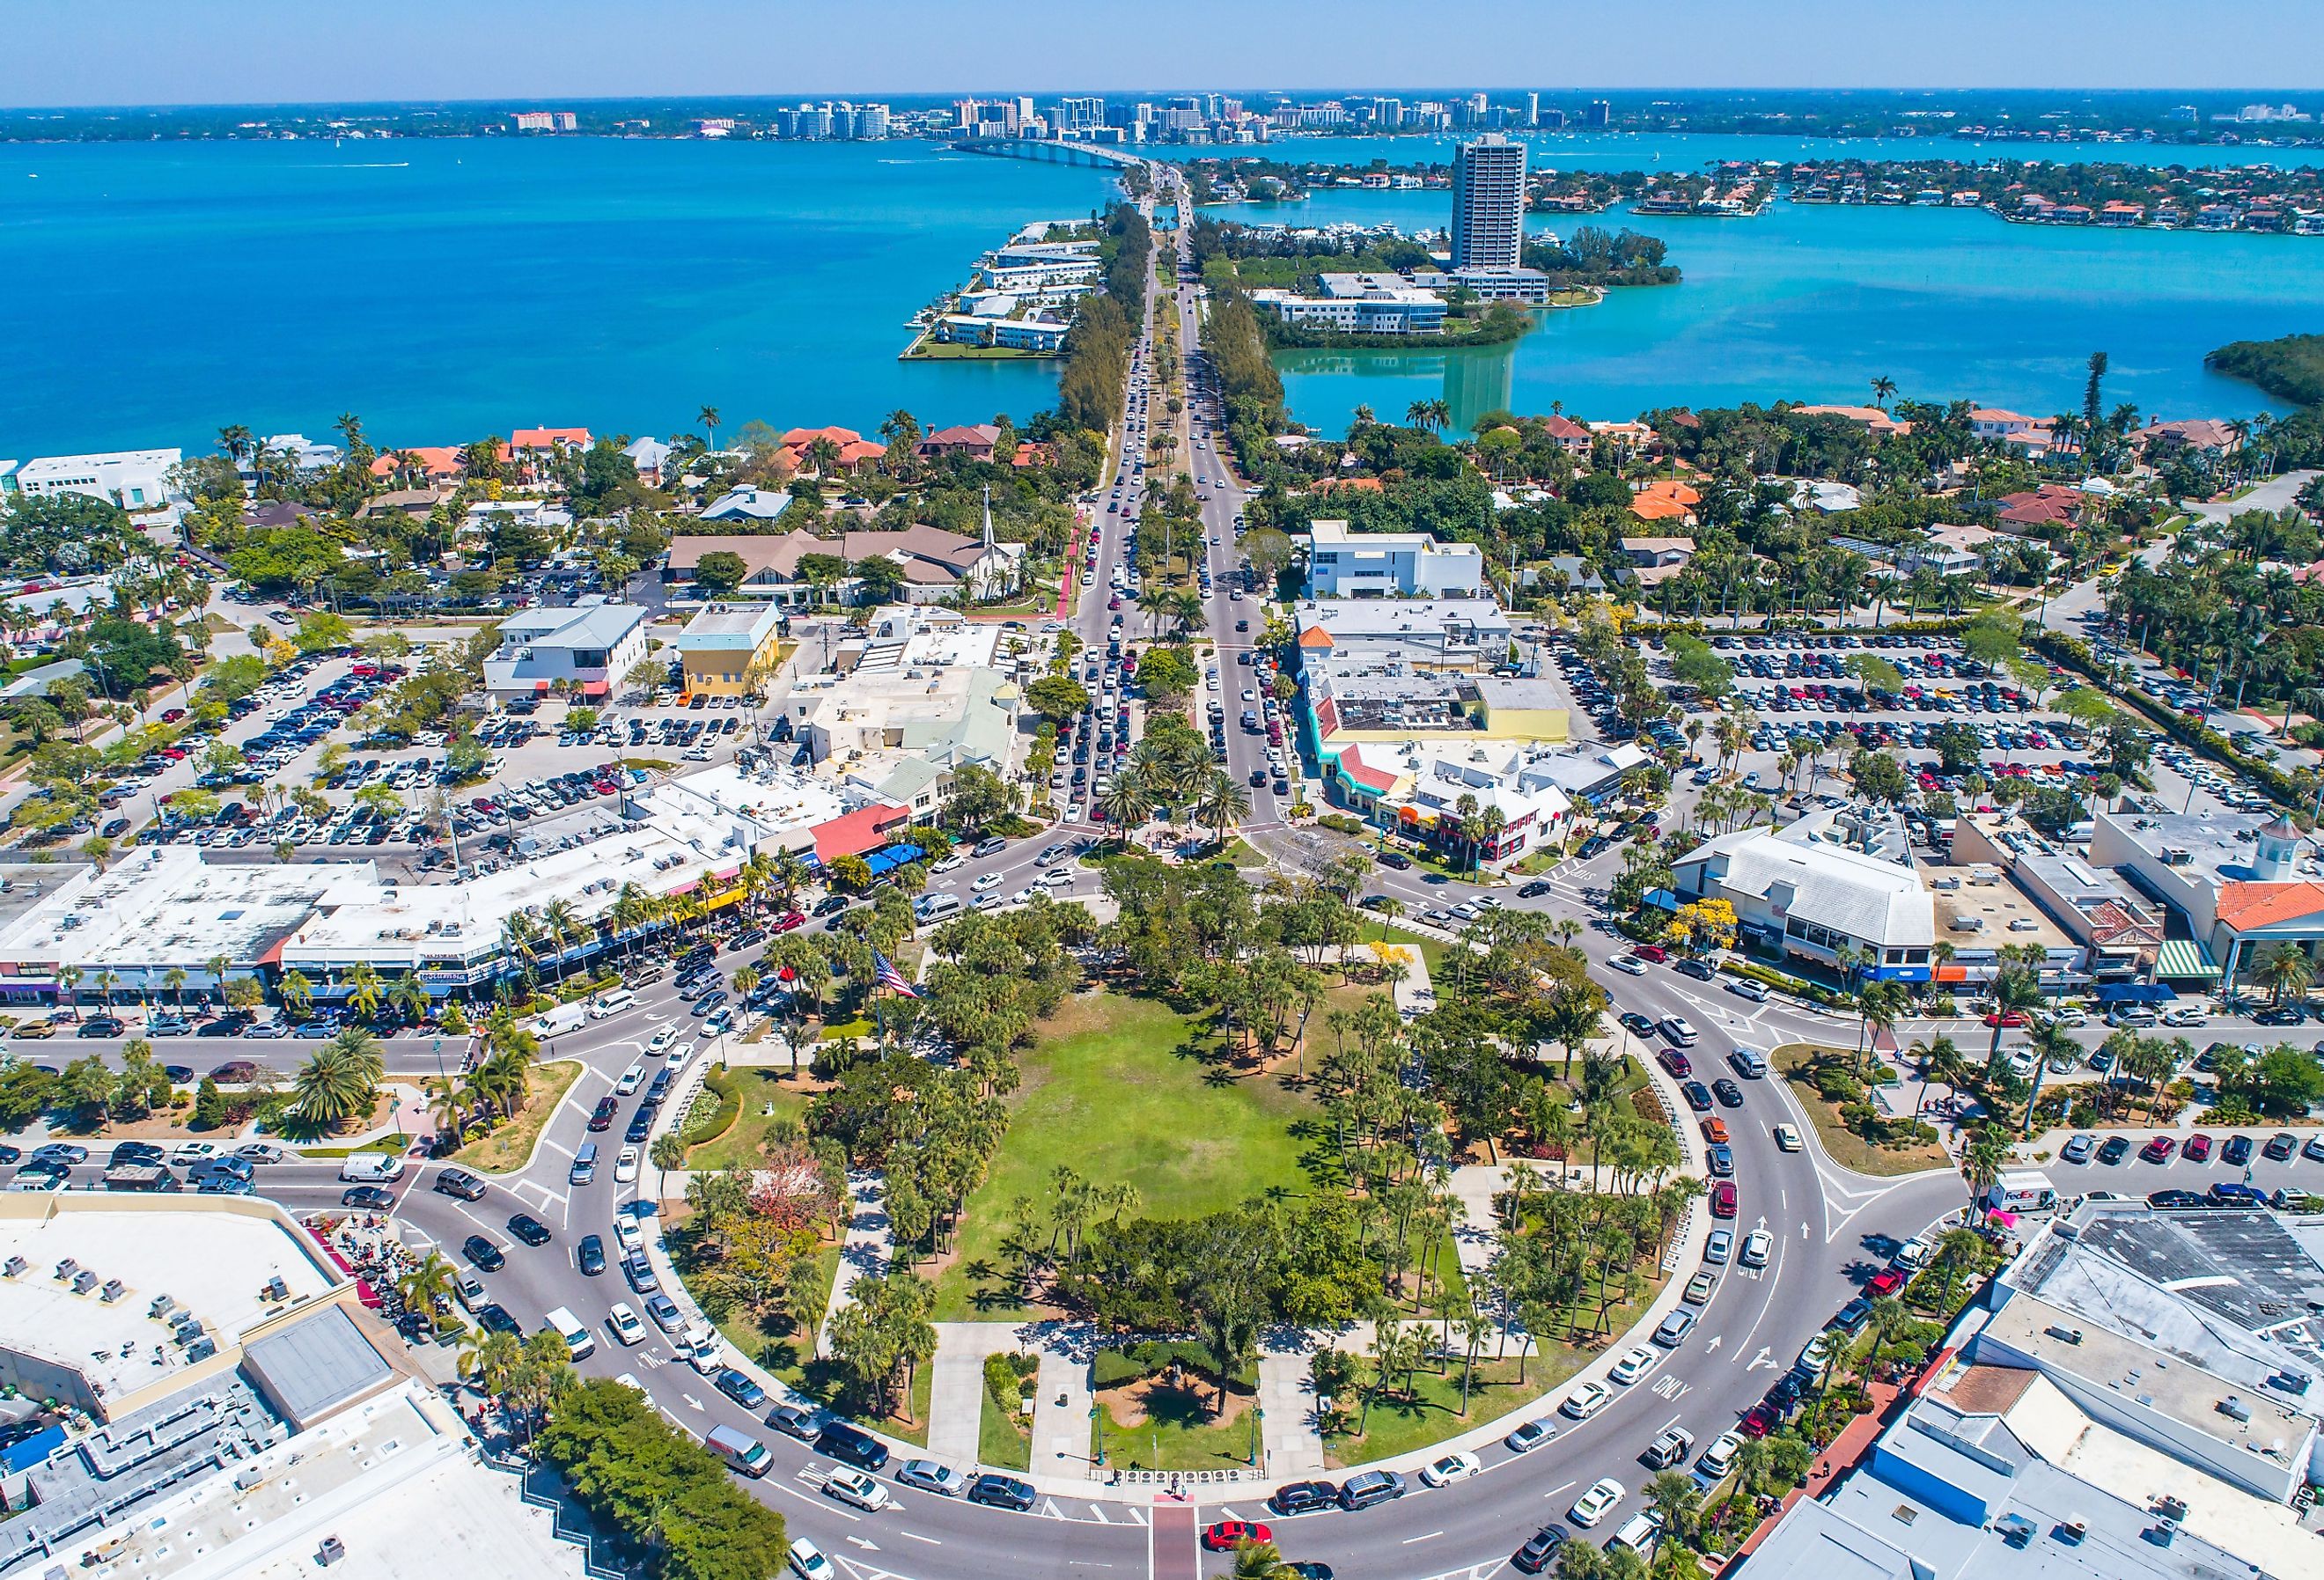 St Armands Circle in Sarasota, Florida. Drone image with sunny blue skies and crystal waters. Image credit Suncoast Aerials via Shutterstock.